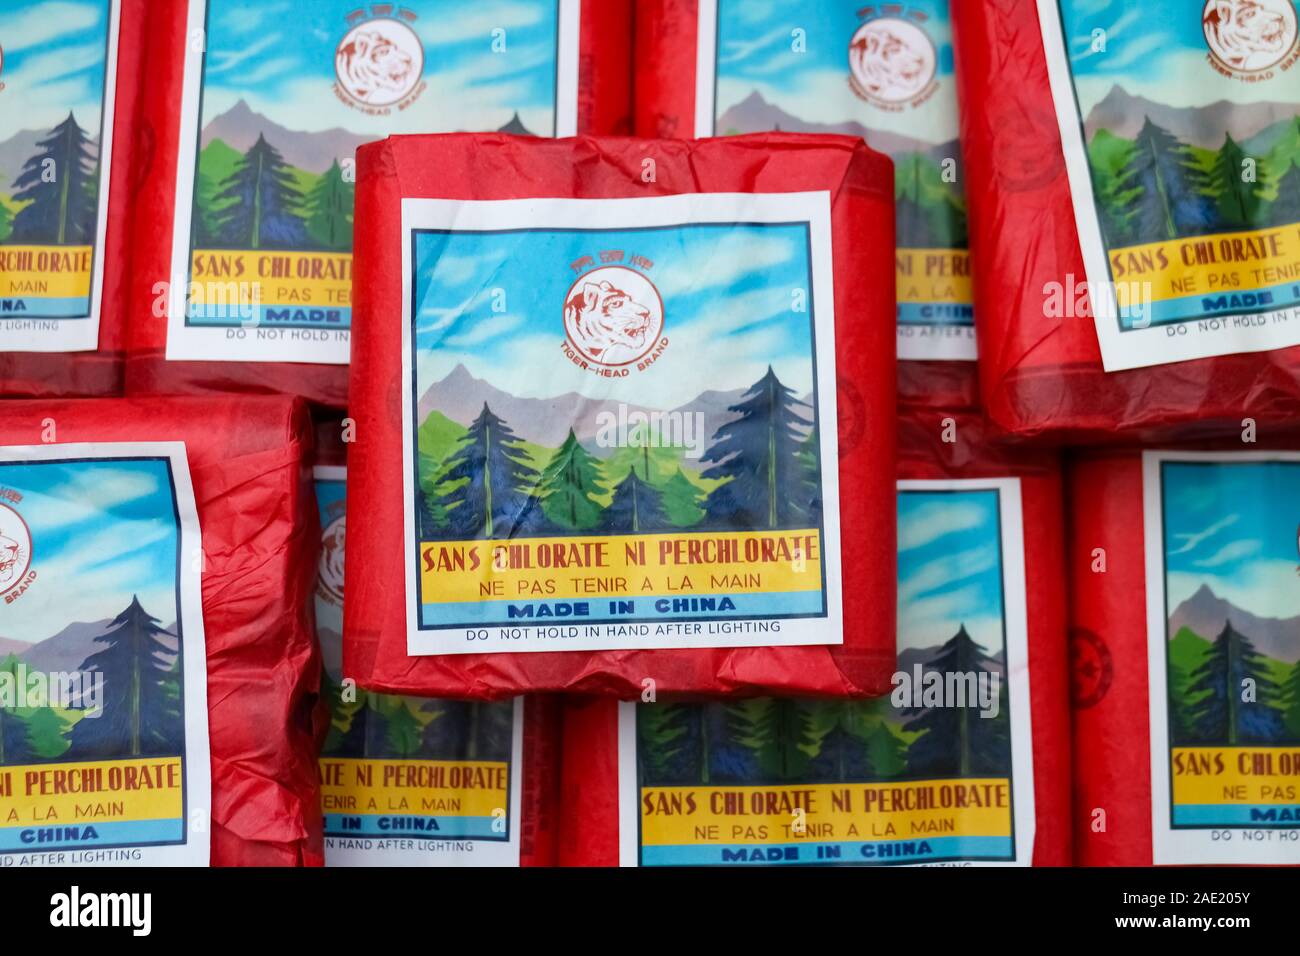 Berlin, Germany - December 3, 2019: Traditional Chinese Tiger Head black powder firecrackers ('Böller') from the German consumer fireworks market. Stock Photo